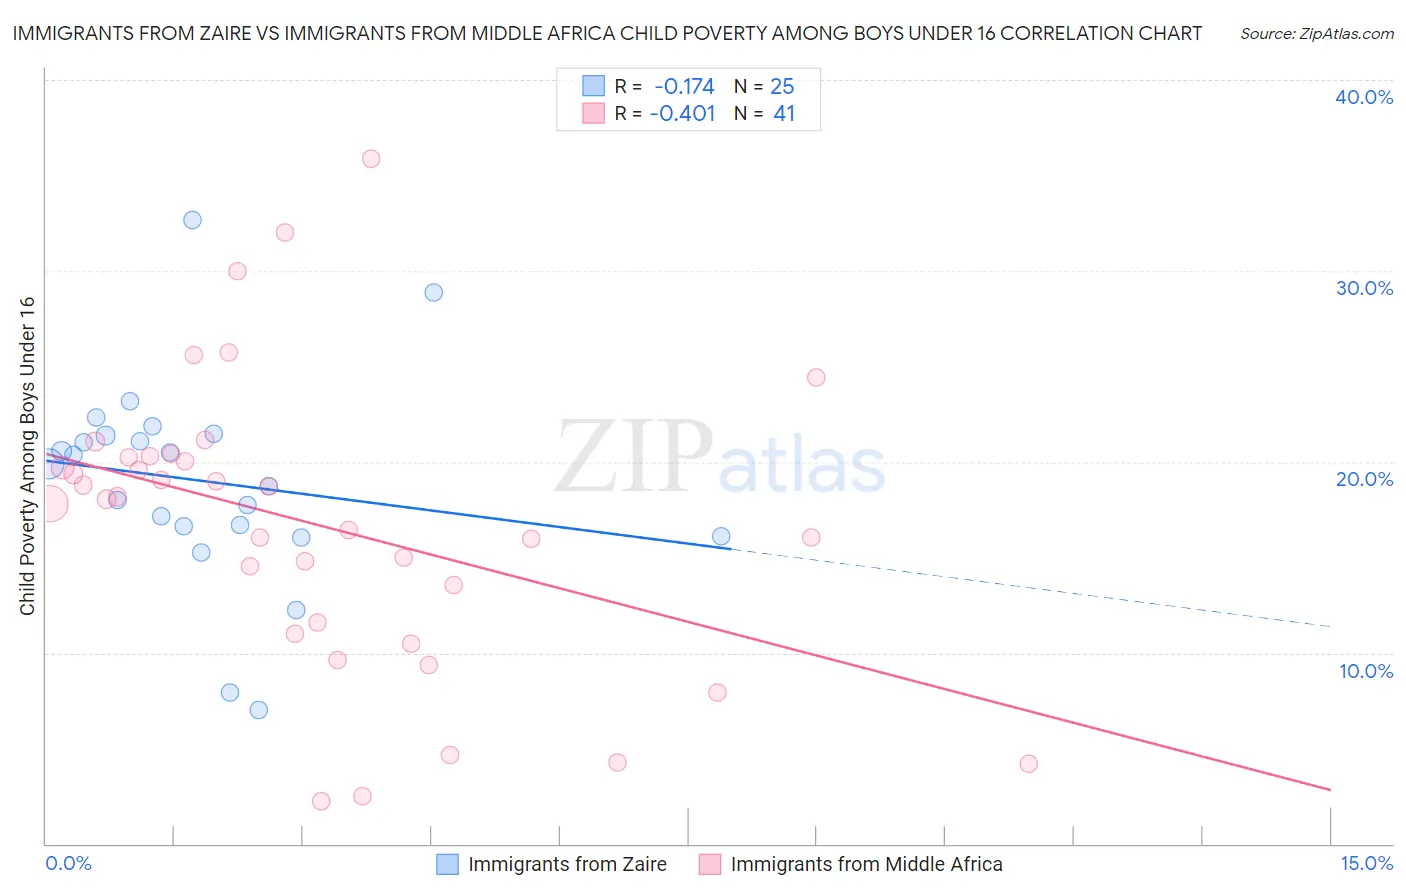 Immigrants from Zaire vs Immigrants from Middle Africa Child Poverty Among Boys Under 16